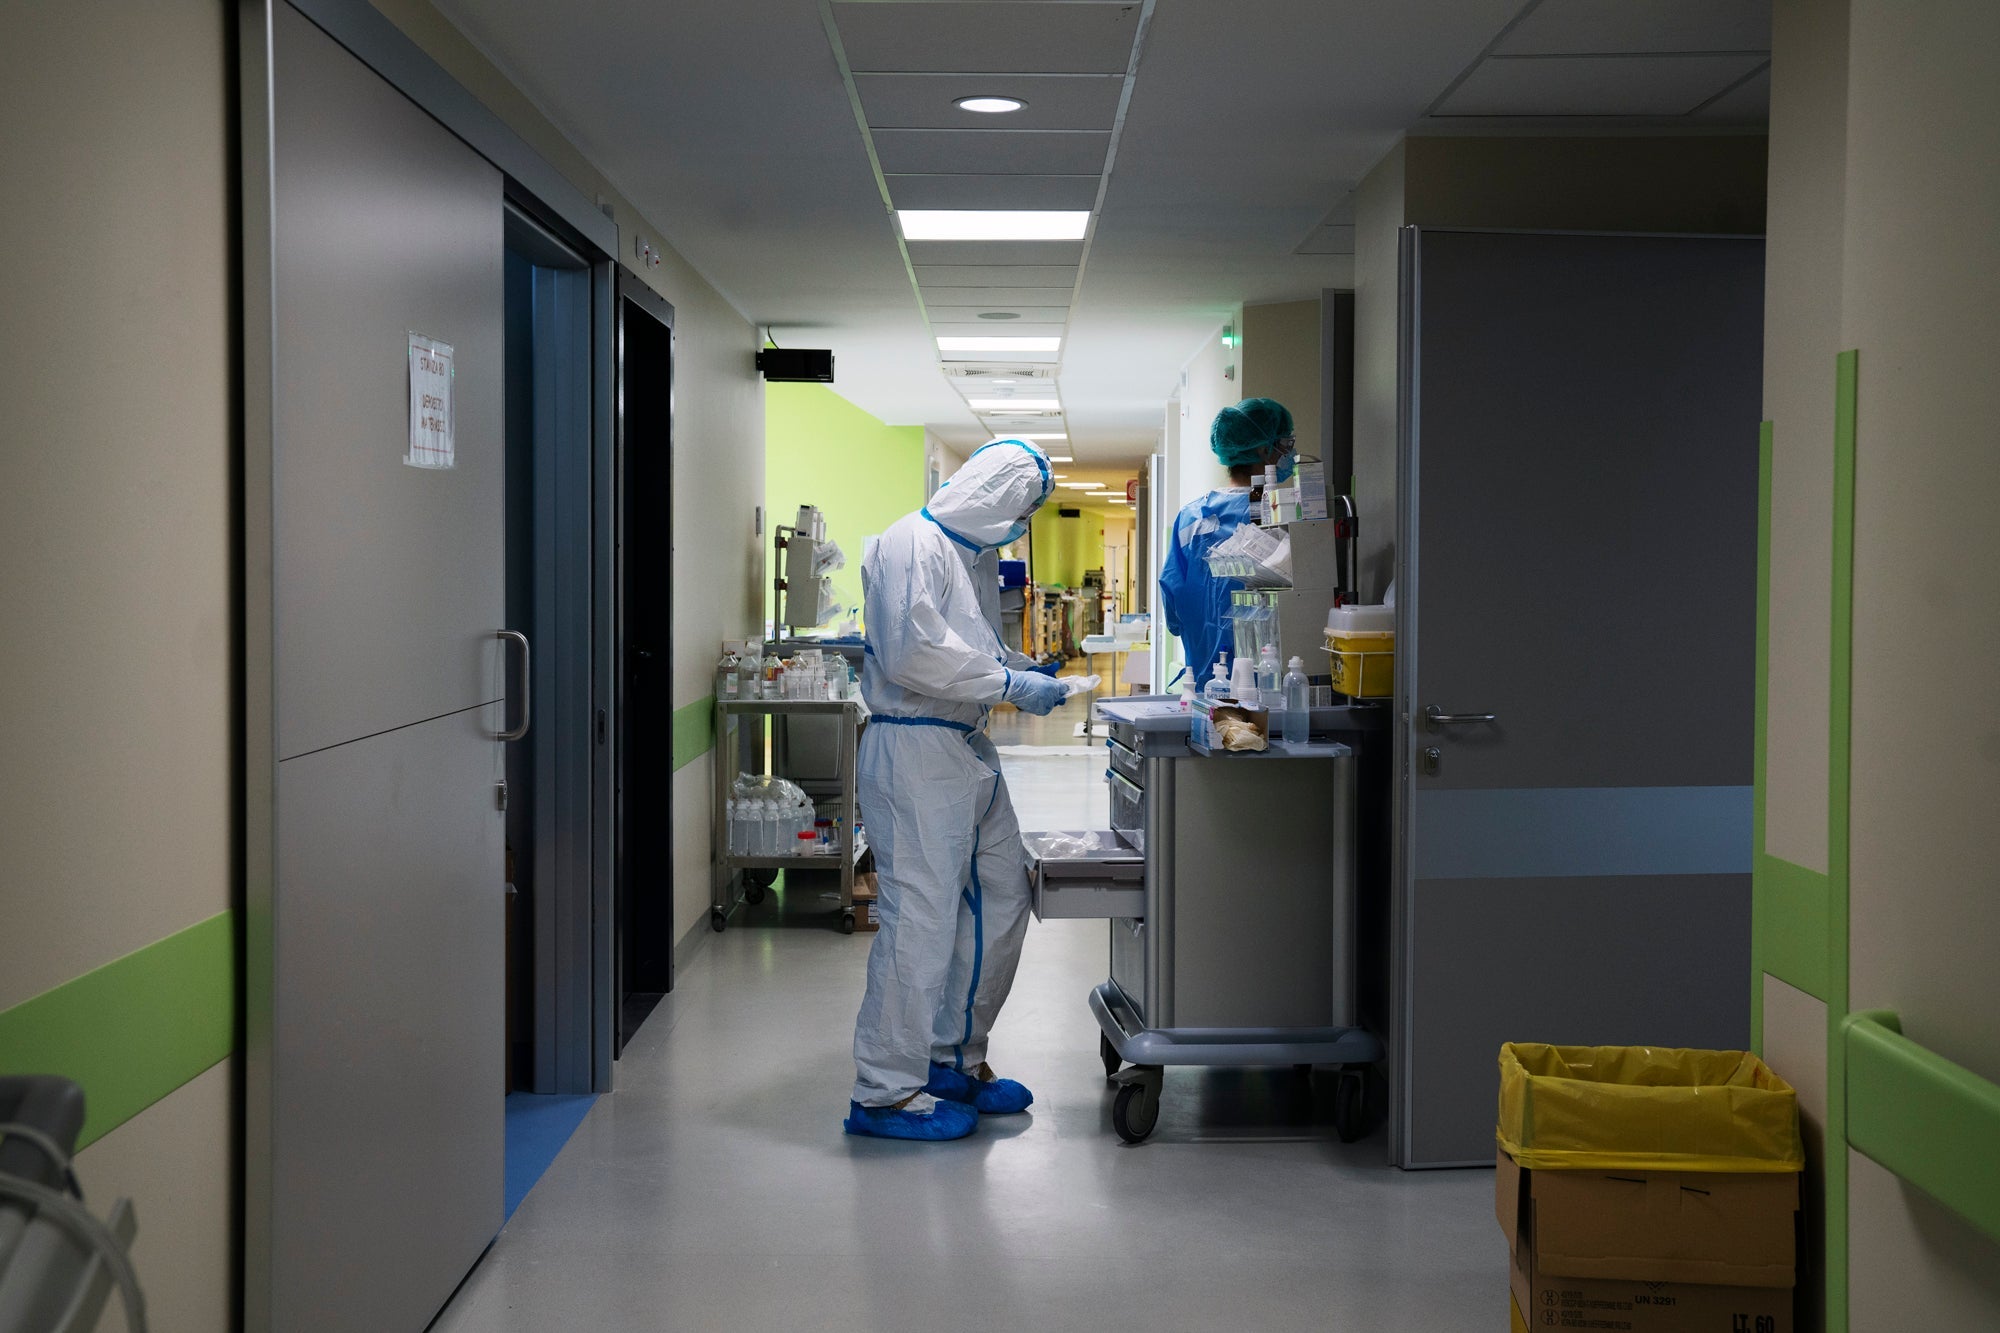 Medical workers in PPE in a hospital hallway.